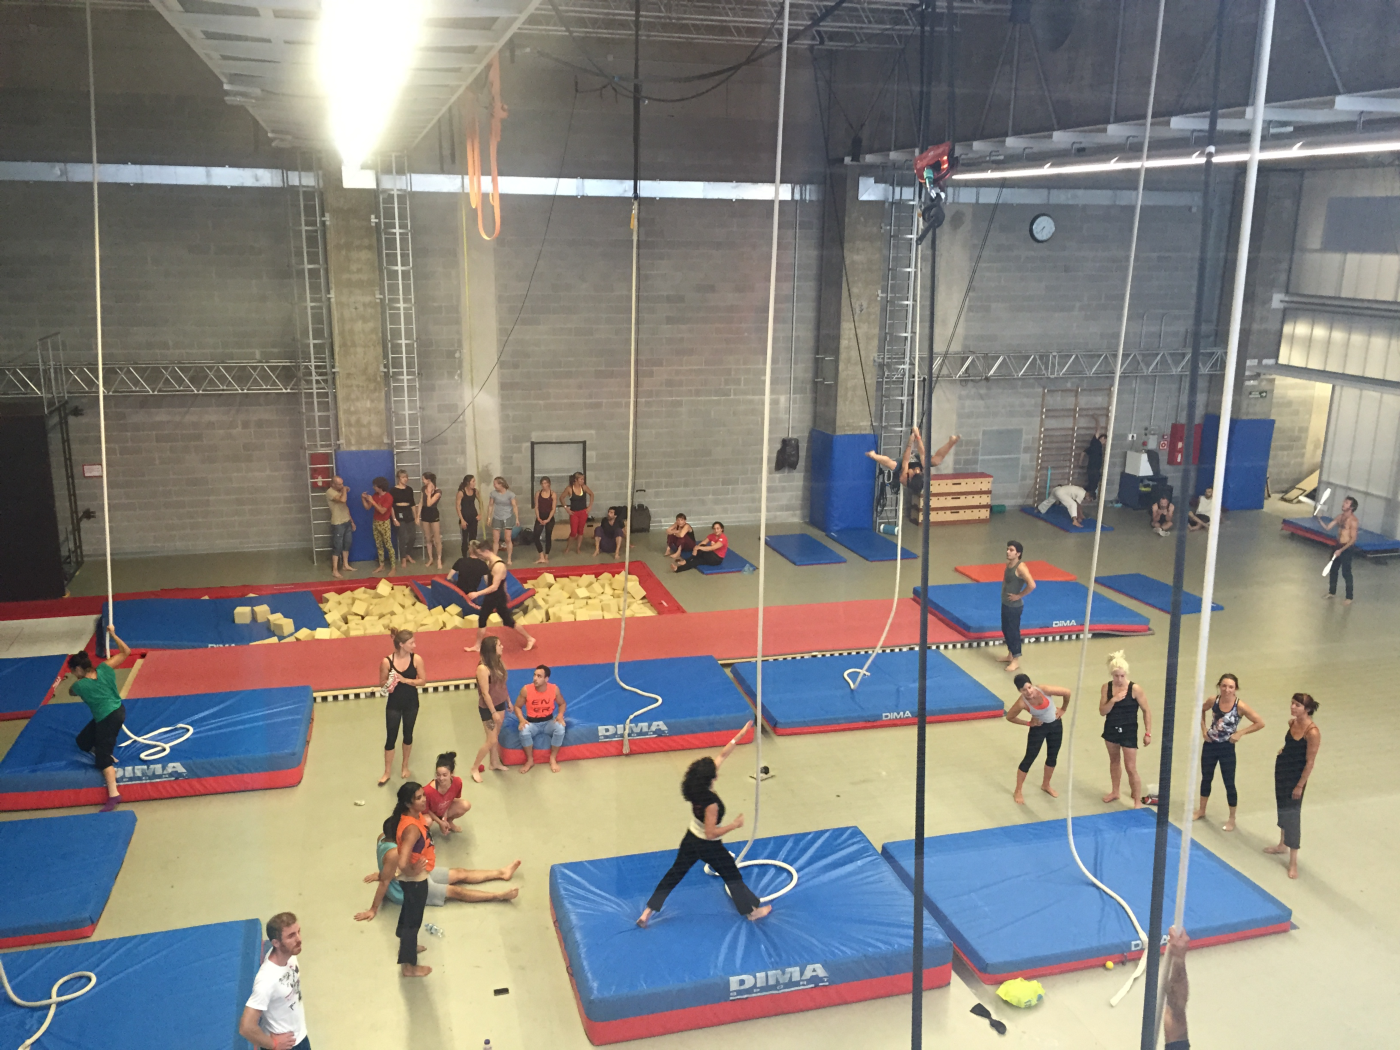 A huge bright 2-story gymnasium viewed from the 2nd floor. Many ropes hang from the ceiling and blue and red mats are scattered across the floor. Rope artists sit, stand, climb and train.